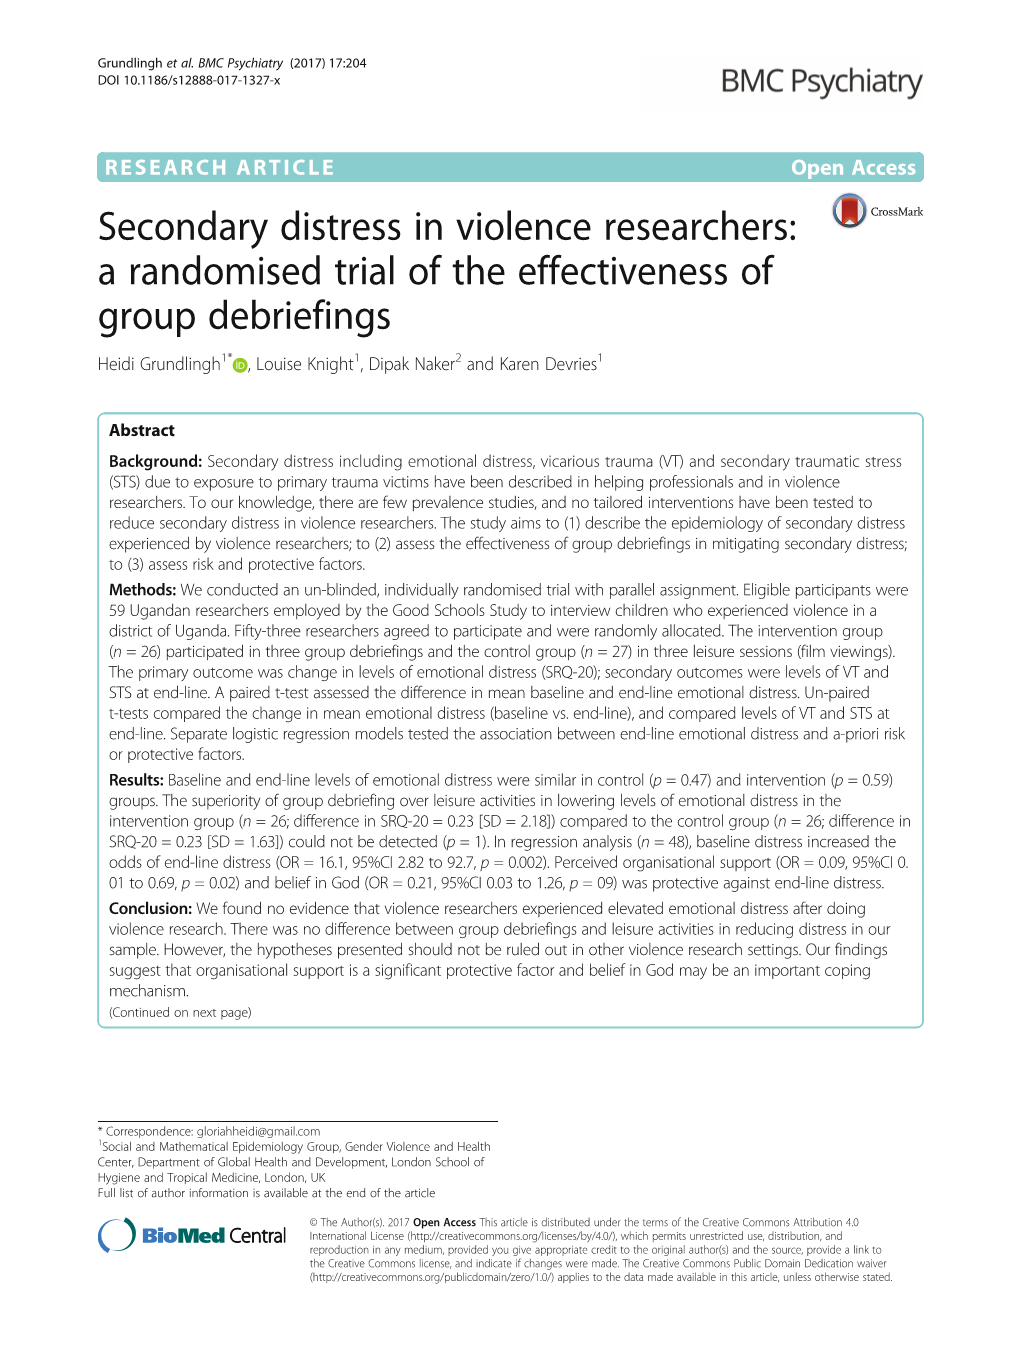 Secondary Distress in Violence Researchers: a Randomised Trial of the Effectiveness of Group Debriefings